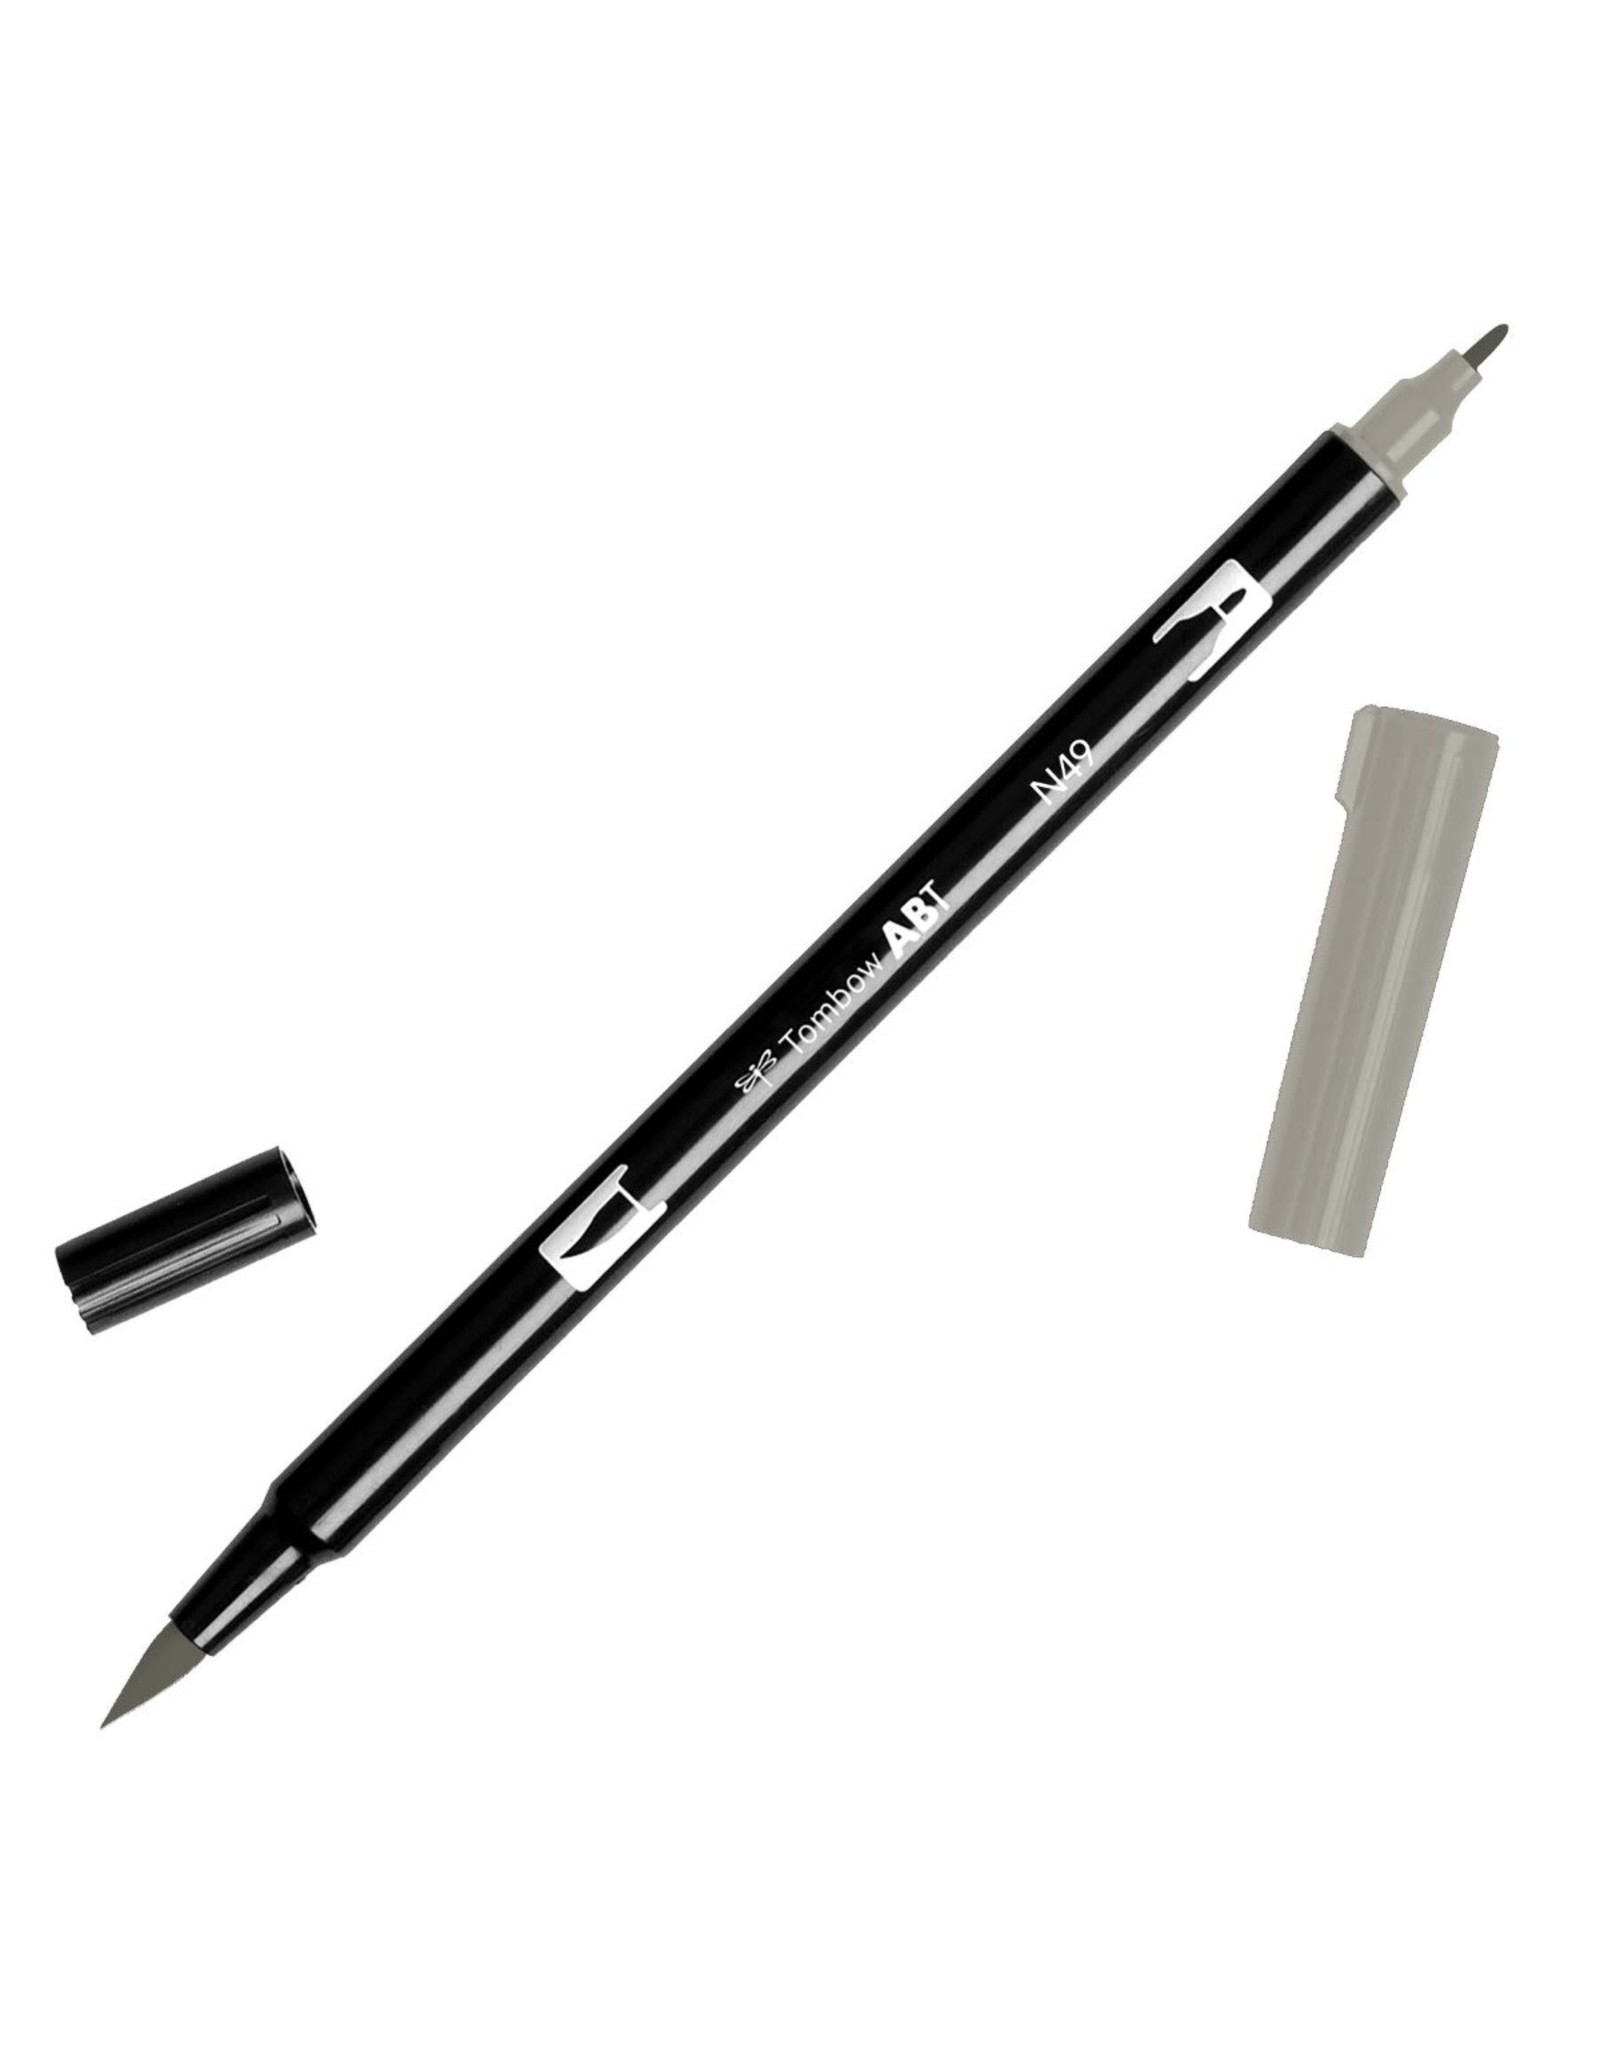 TOMBOW TOMBOW ABT-N49 WARM GRAY 8 DUAL BRUSH MARKER